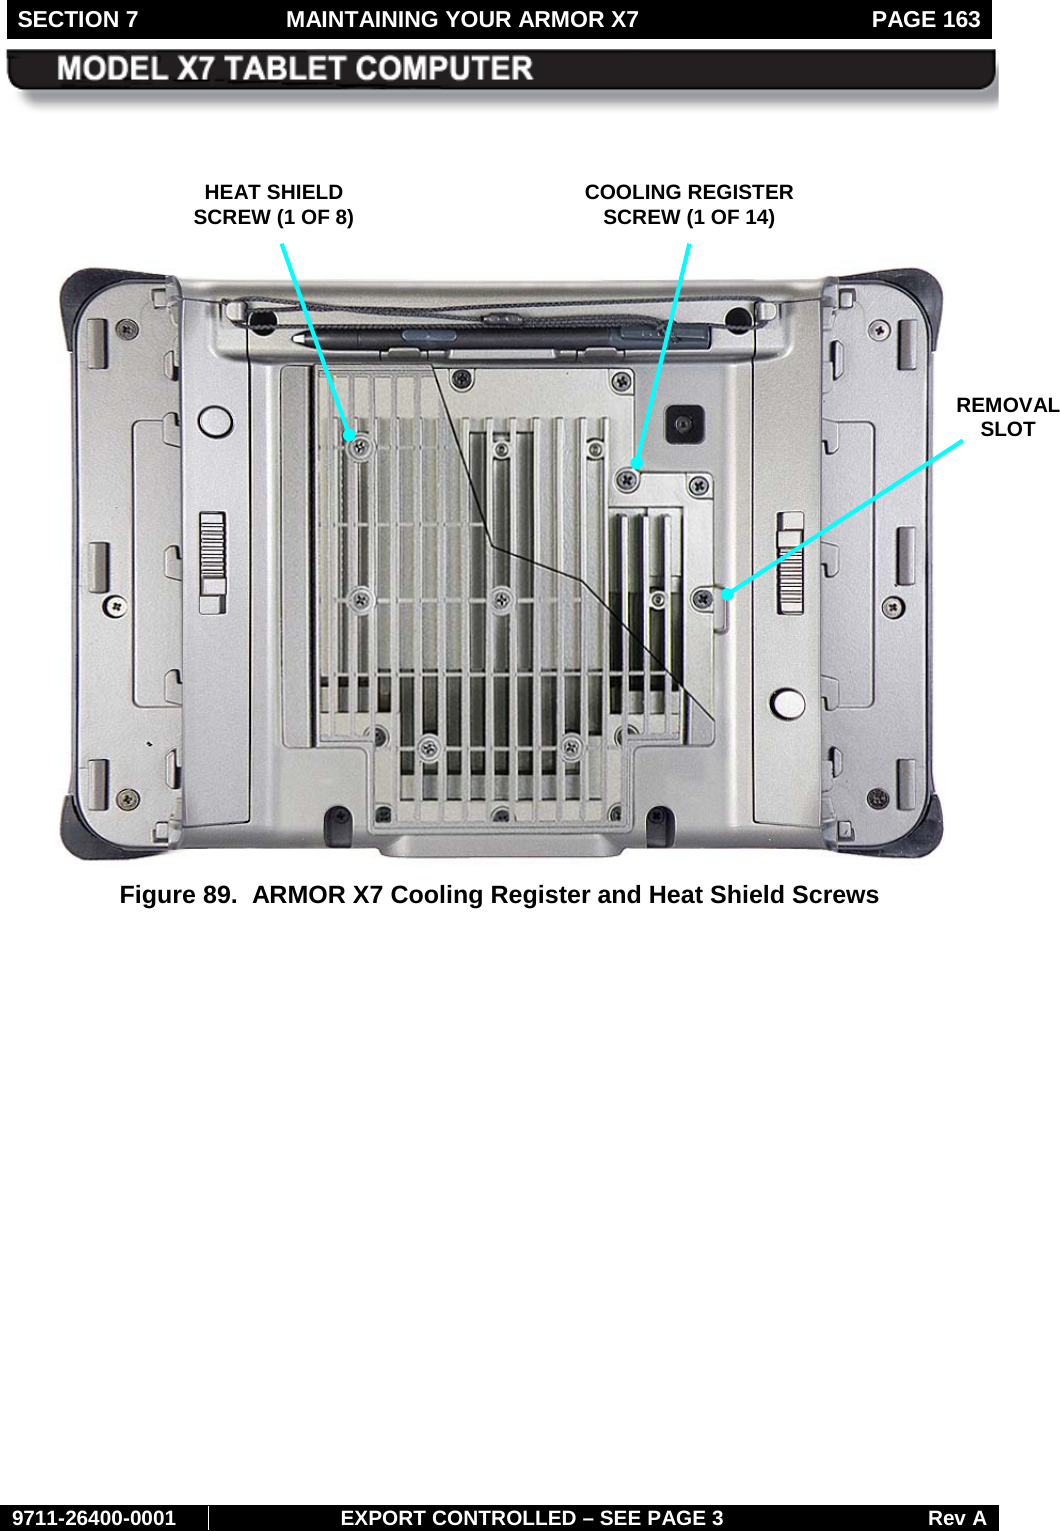 SECTION 7  MAINTAINING YOUR ARMOR X7  PAGE 163        9711-26400-0001 EXPORT CONTROLLED – SEE PAGE 3 Rev A       Figure 89.  ARMOR X7 Cooling Register and Heat Shield Screws        HEAT SHIELD SCREW (1 OF 8) COOLING REGISTER   SCREW (1 OF 14) REMOVAL  SLOT 